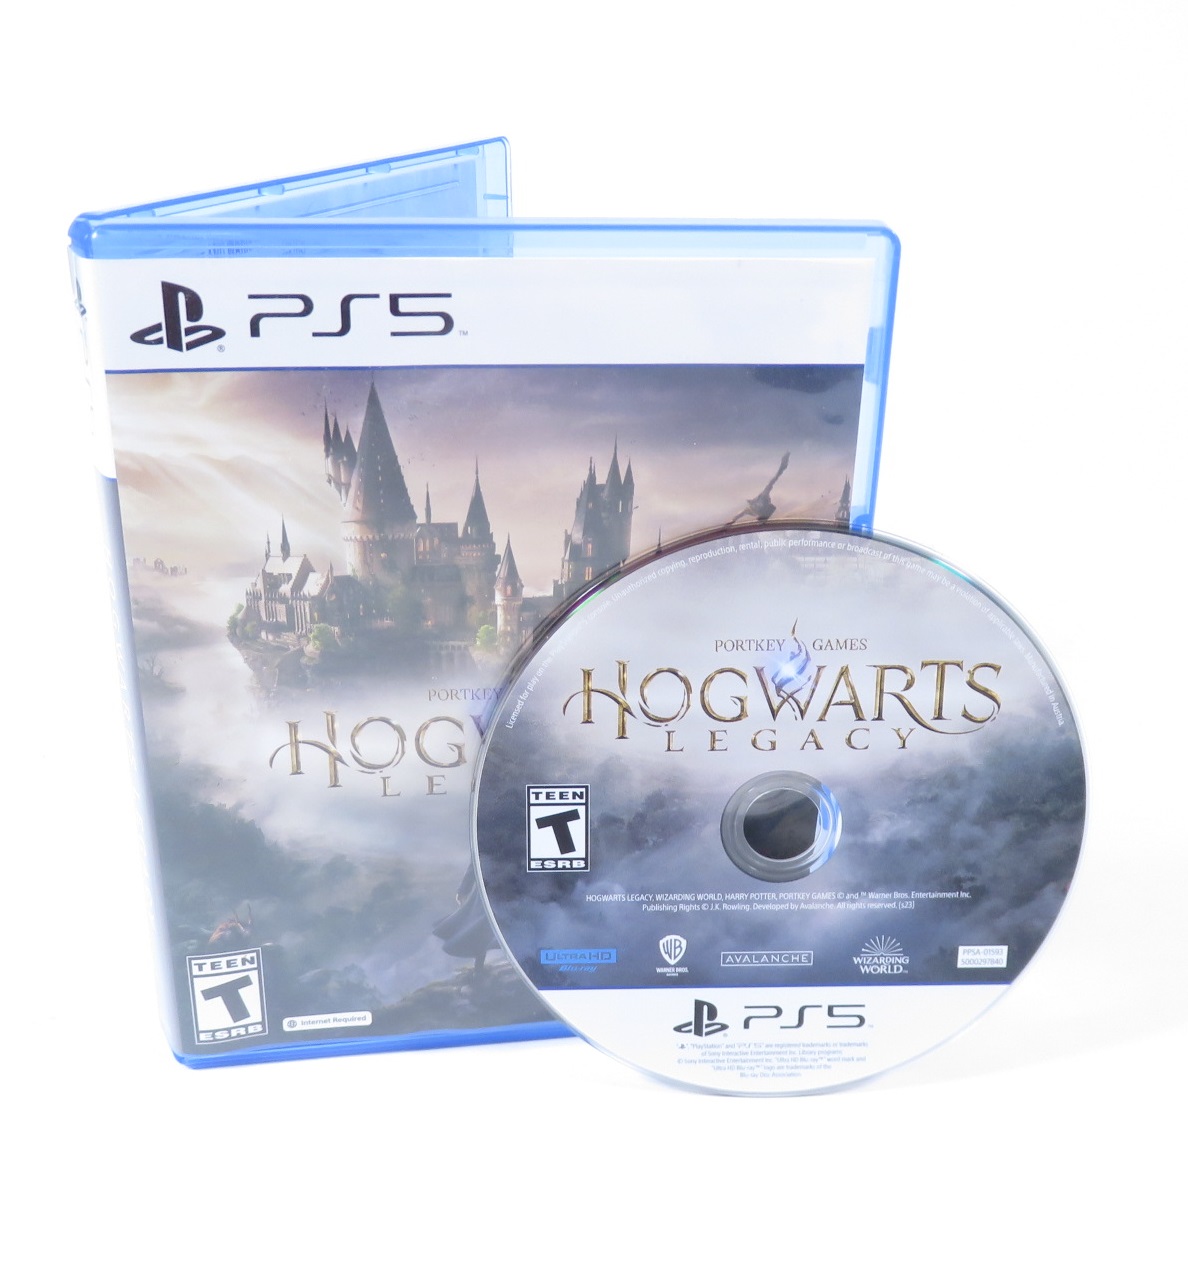 PlayStation Video Hogwarts the Legacy Sony 5 for Game